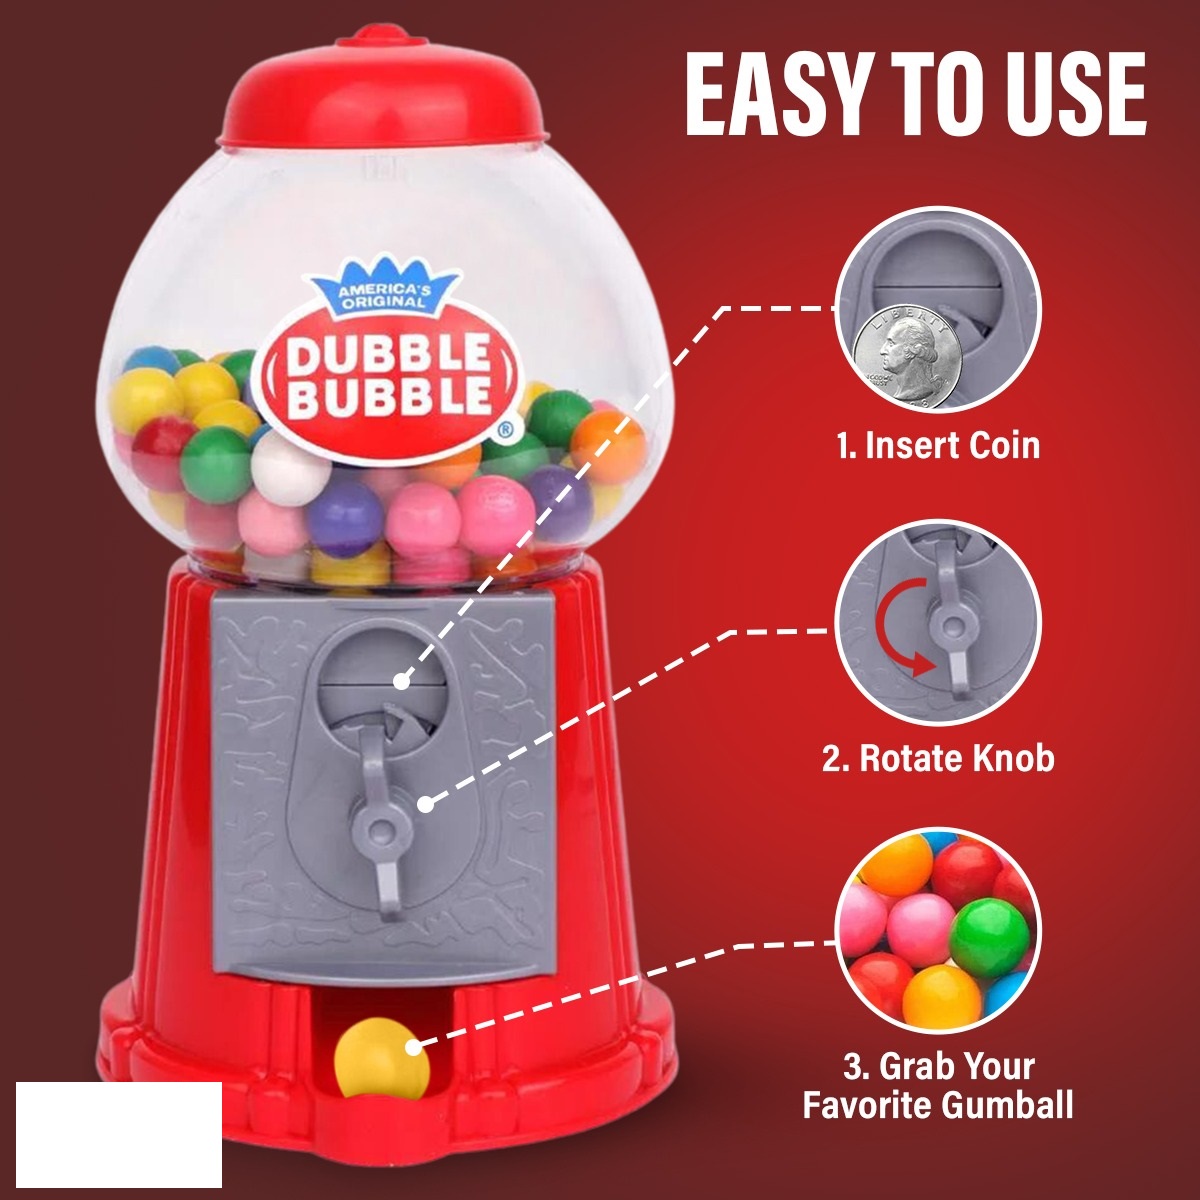 Joyabit Coin Operated Gumball Machine Toy Bank Dubble Bubble Classic Style Multi-color Solid Print Party Favors, with 45 Gum Balls 45 Count - image 4 of 9